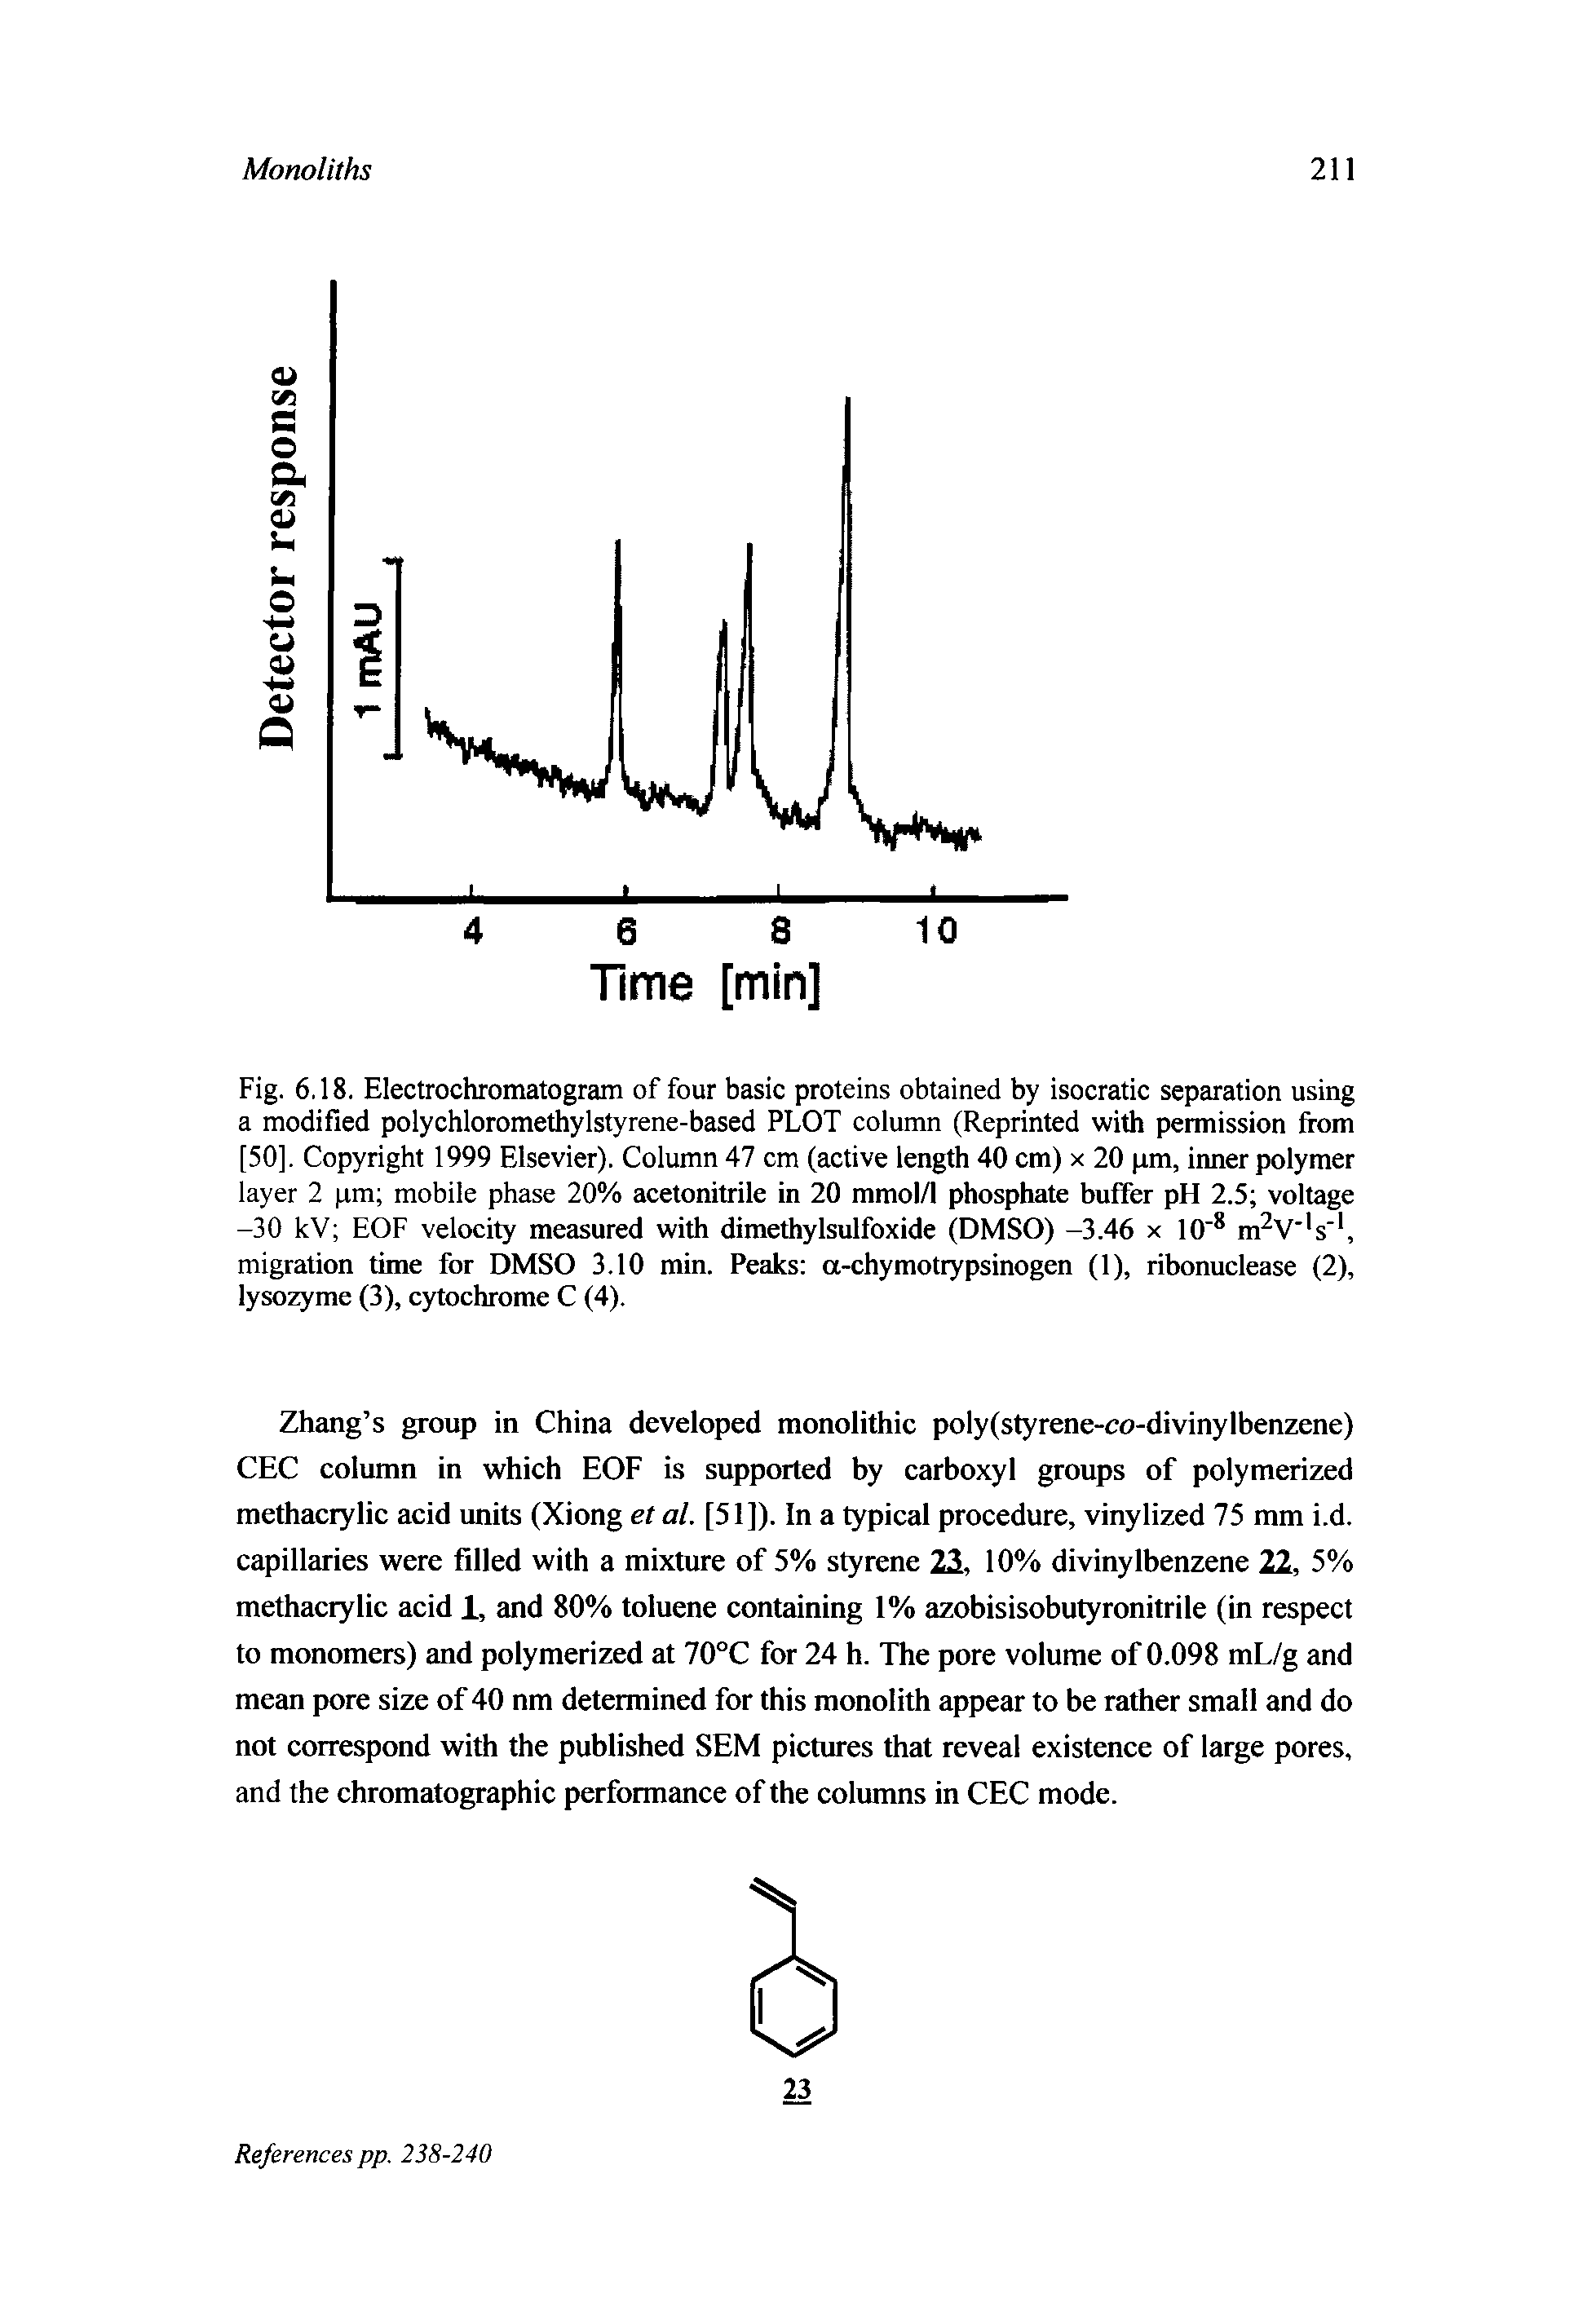 Fig. 6.18. Electrochromatogram of four basic proteins obtained by isocratic separation using a modified polychloromethylstyrene-based PLOT column (Reprinted with permission from [50]. Copyright 1999 Elsevier). Column 47 cm (active length 40 cm) x 20 pm, inner polymer layer 2 pm mobile phase 20% acetonitrile in 20 mmol/1 phosphate buffer pH 2.5 voltage -30 kV EOF velocity measured with dimethylsulfoxide (DMSO) -3.46 x 10"8 m2V ls 1, migration time for DMSO 3.10 min. Peaks a-chymotrypsinogen (1), ribonuclease (2), lysozyme (3), cytochrome C (4).